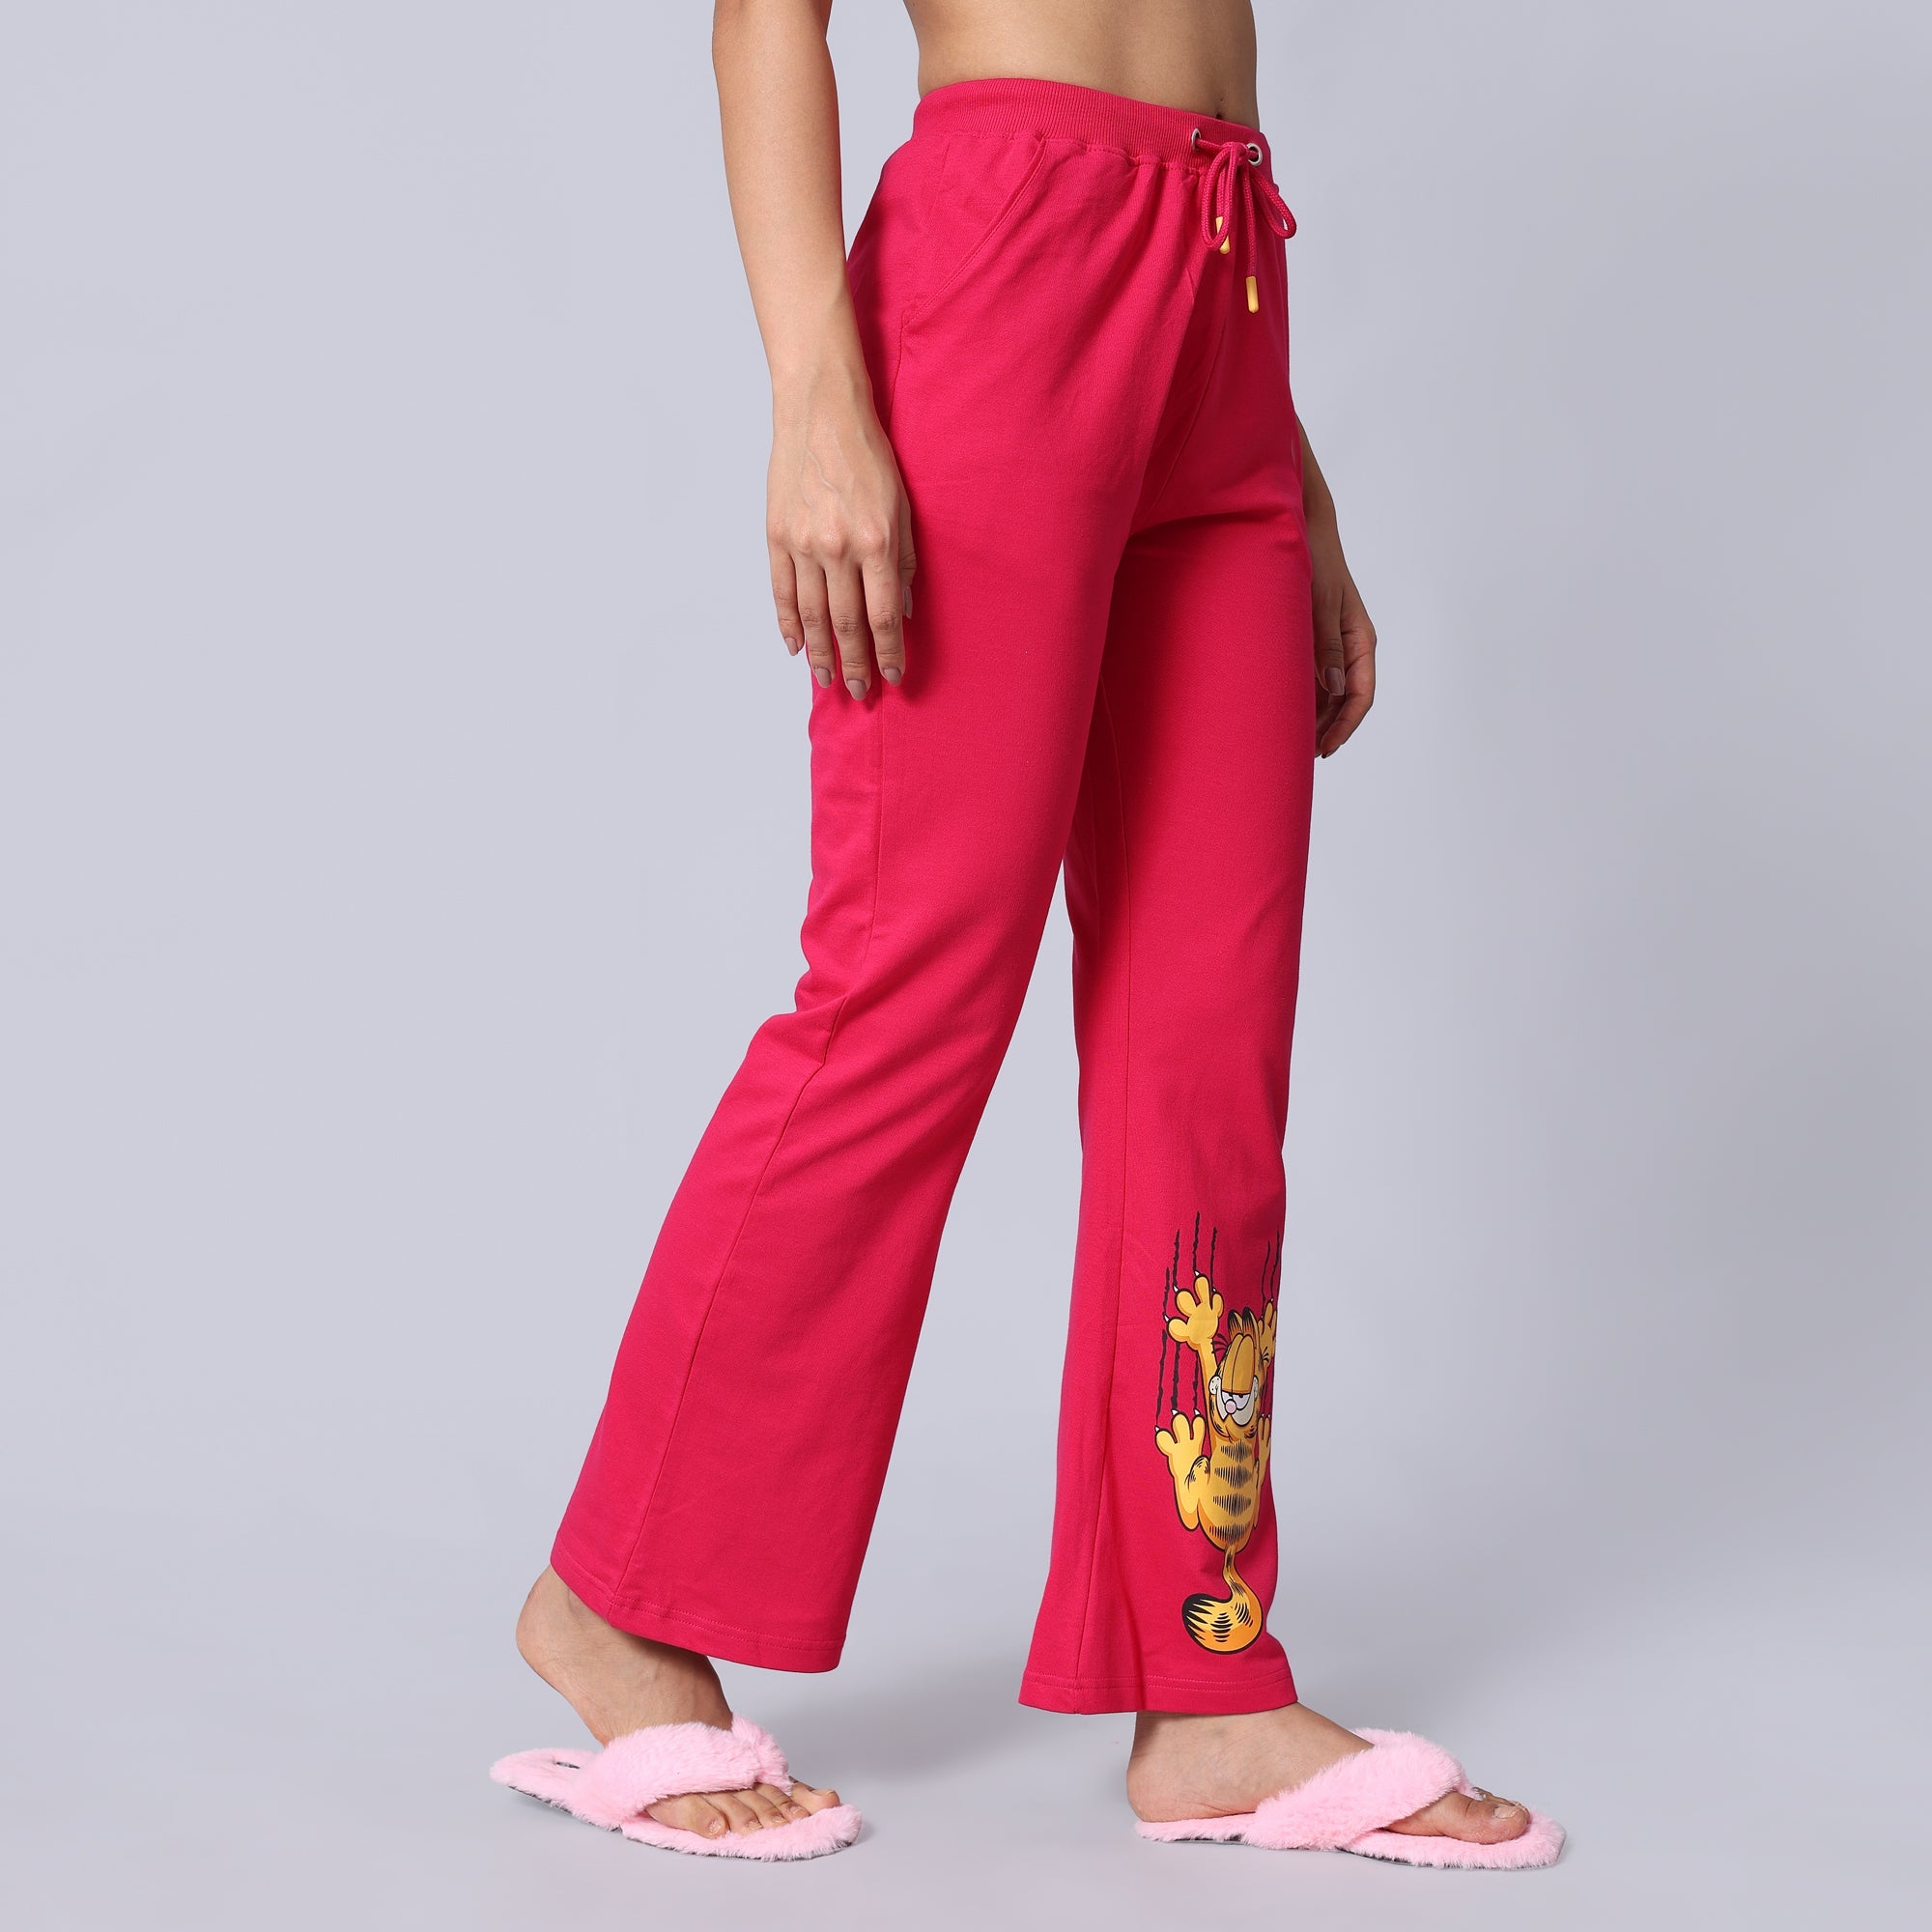 Evolove X Garfield Women's Super Soft Comfortable Cotton Printed Pyjama Relaxed Lounge Pants with Pockets